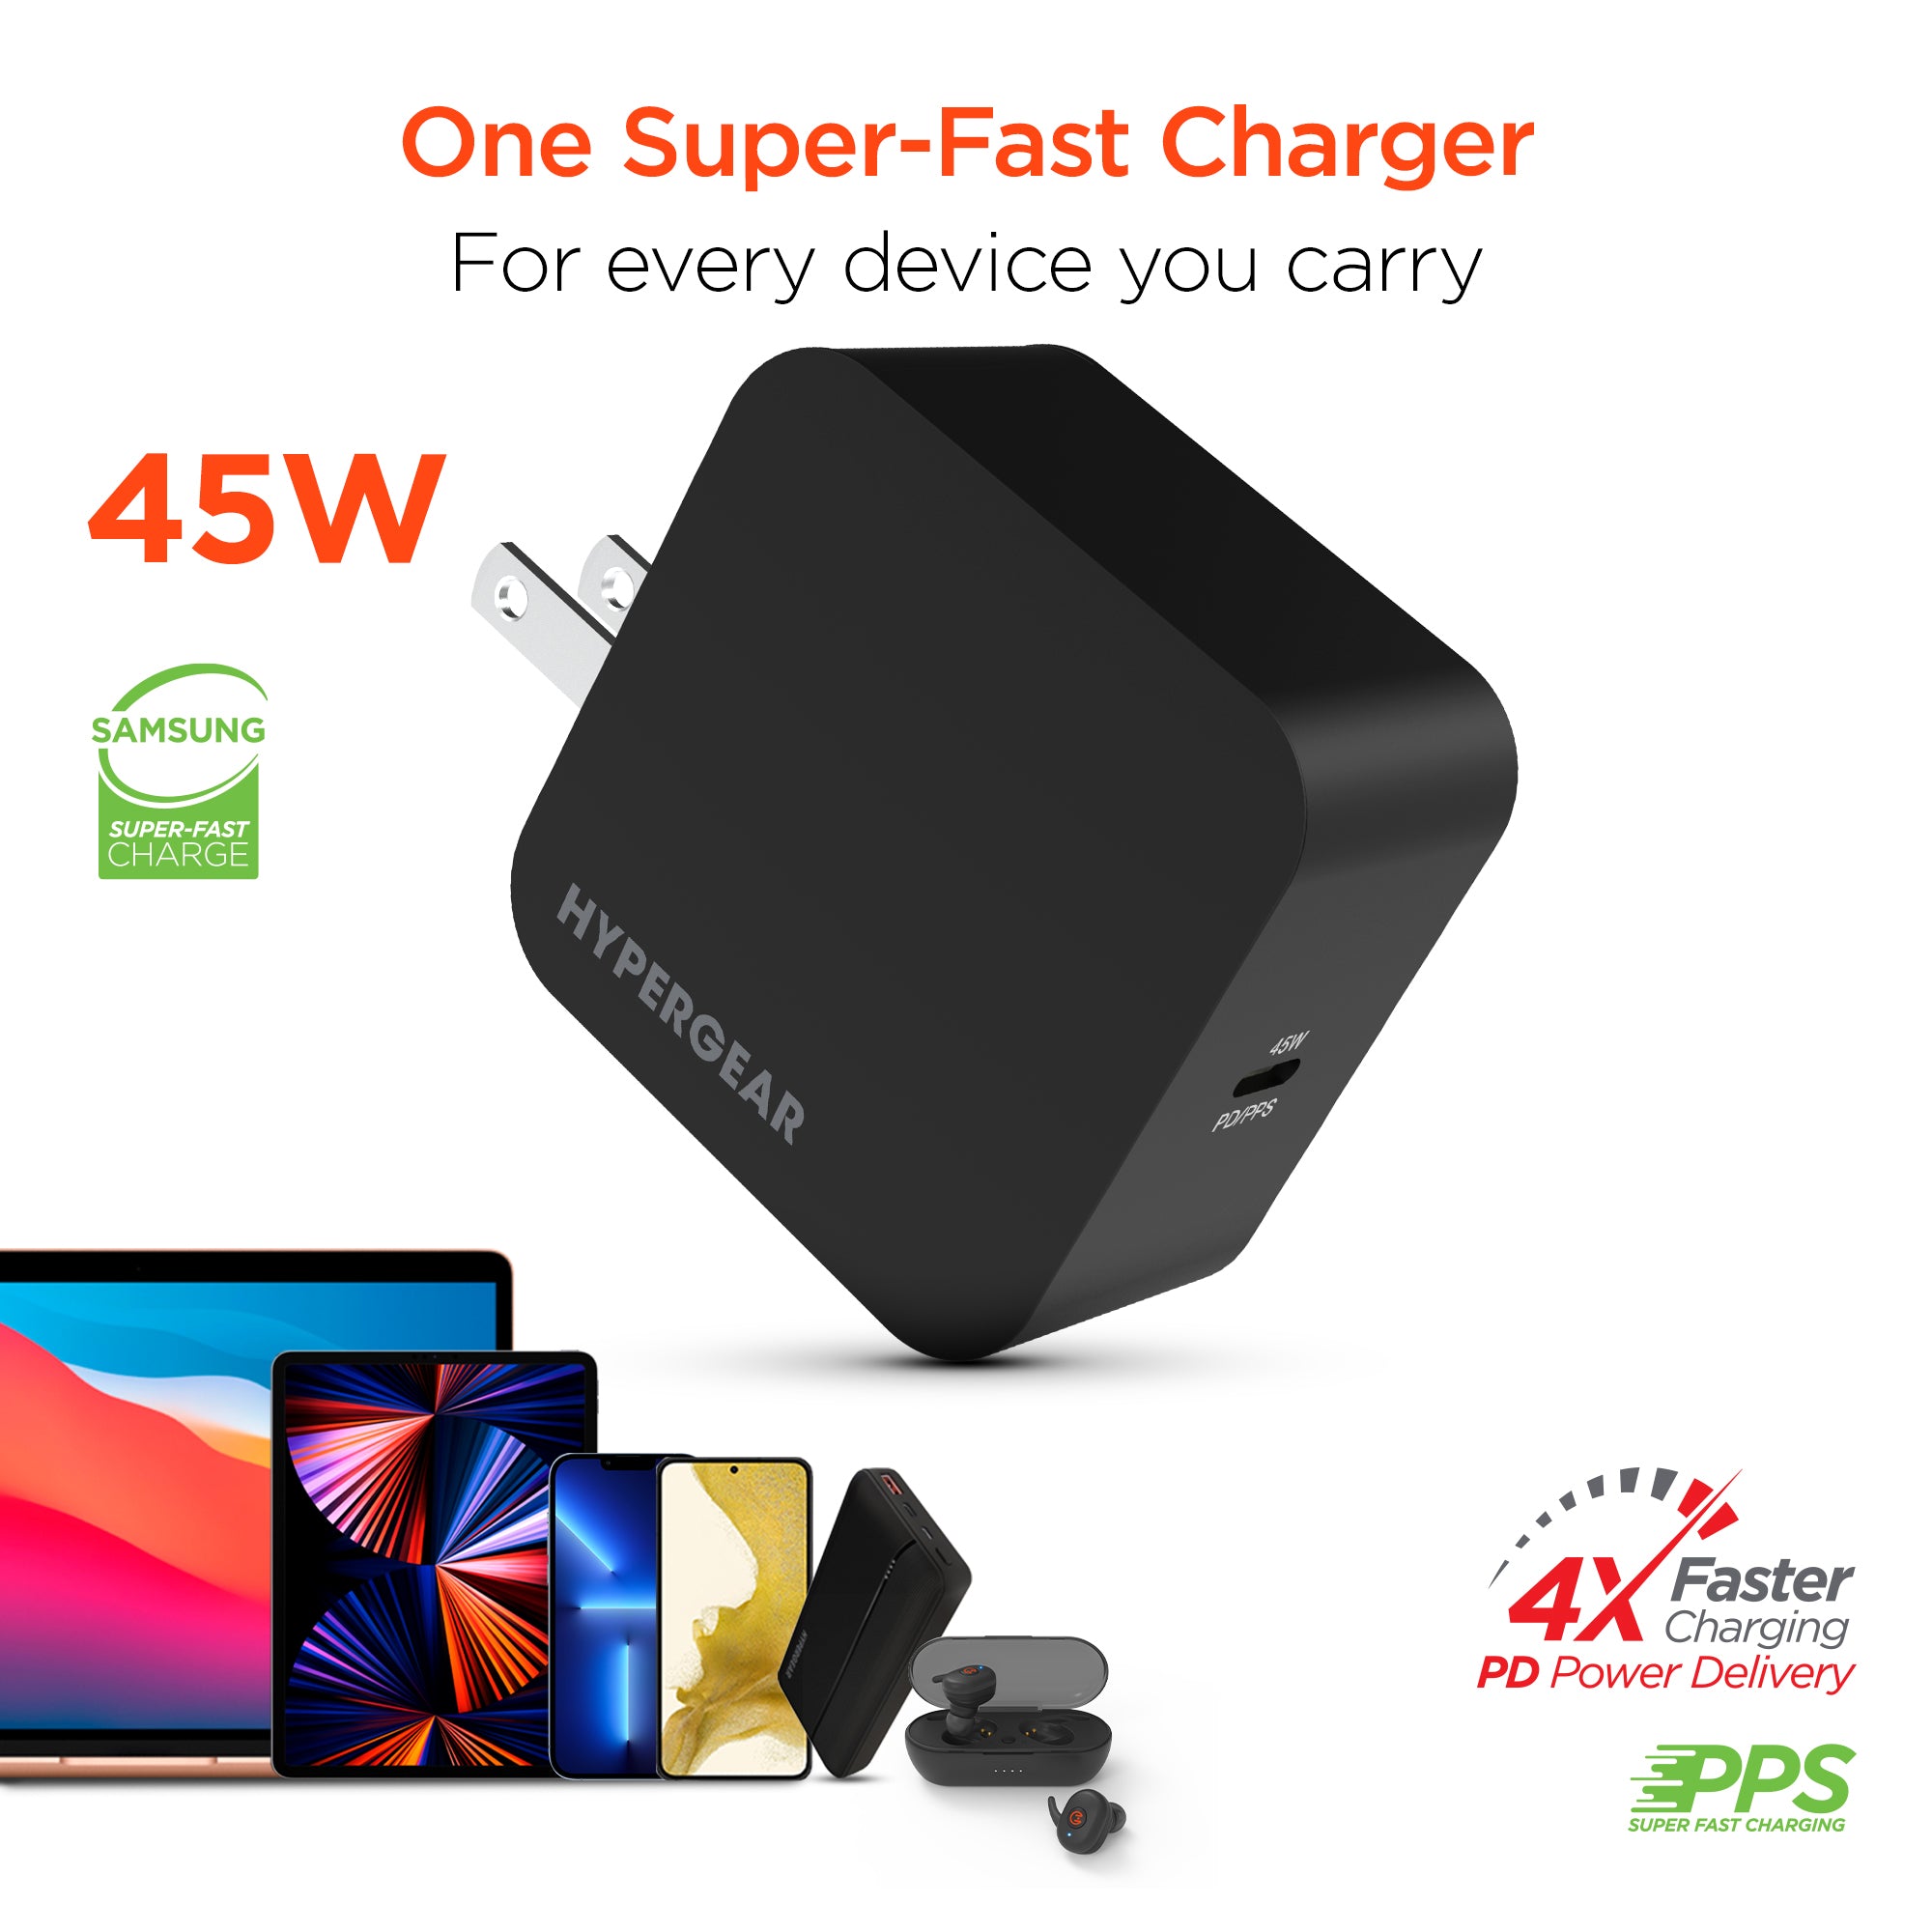  45W Samsung Super Fast Charger Type C, USB C Android